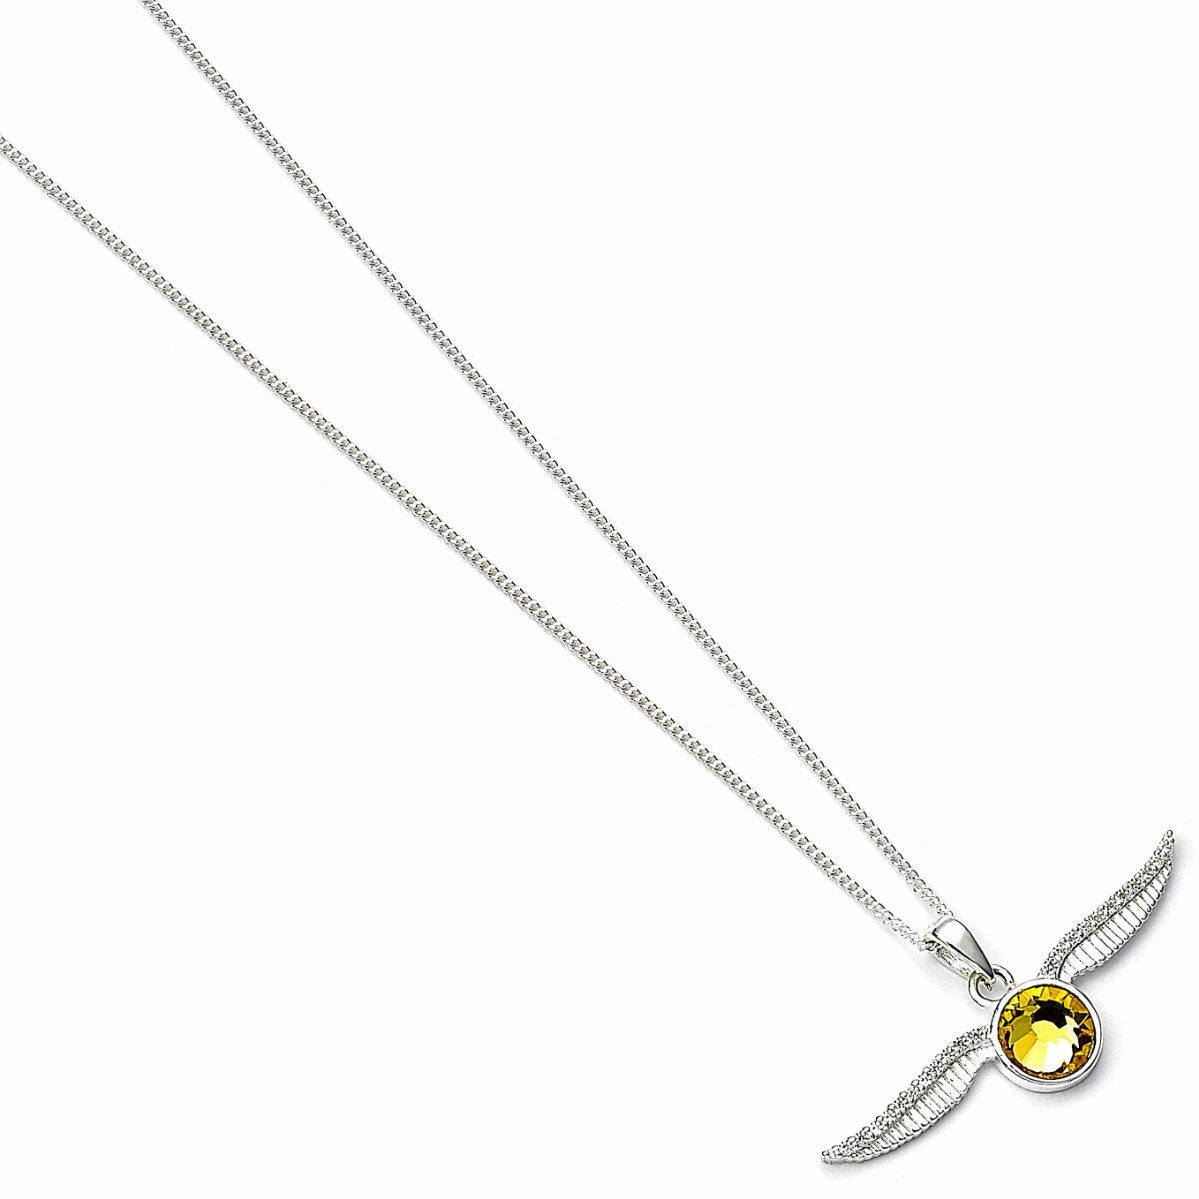 Sterling Silver Golden Snitch Necklace with Crystals